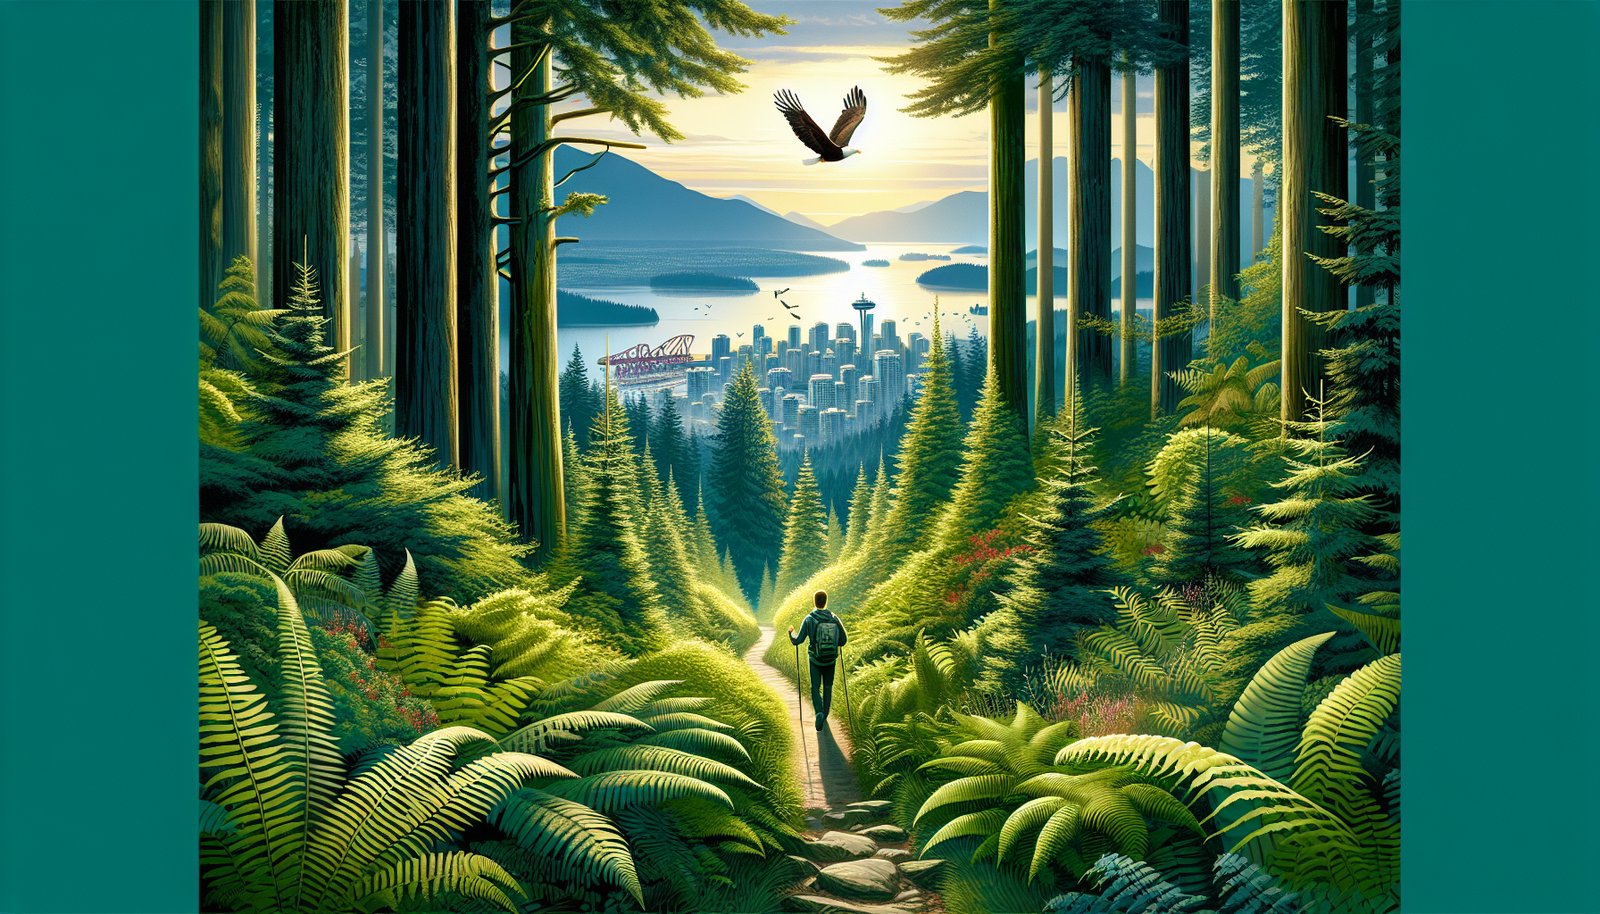 Illustration of a person hiking on a trail with a scenic view of Vancouver's nature